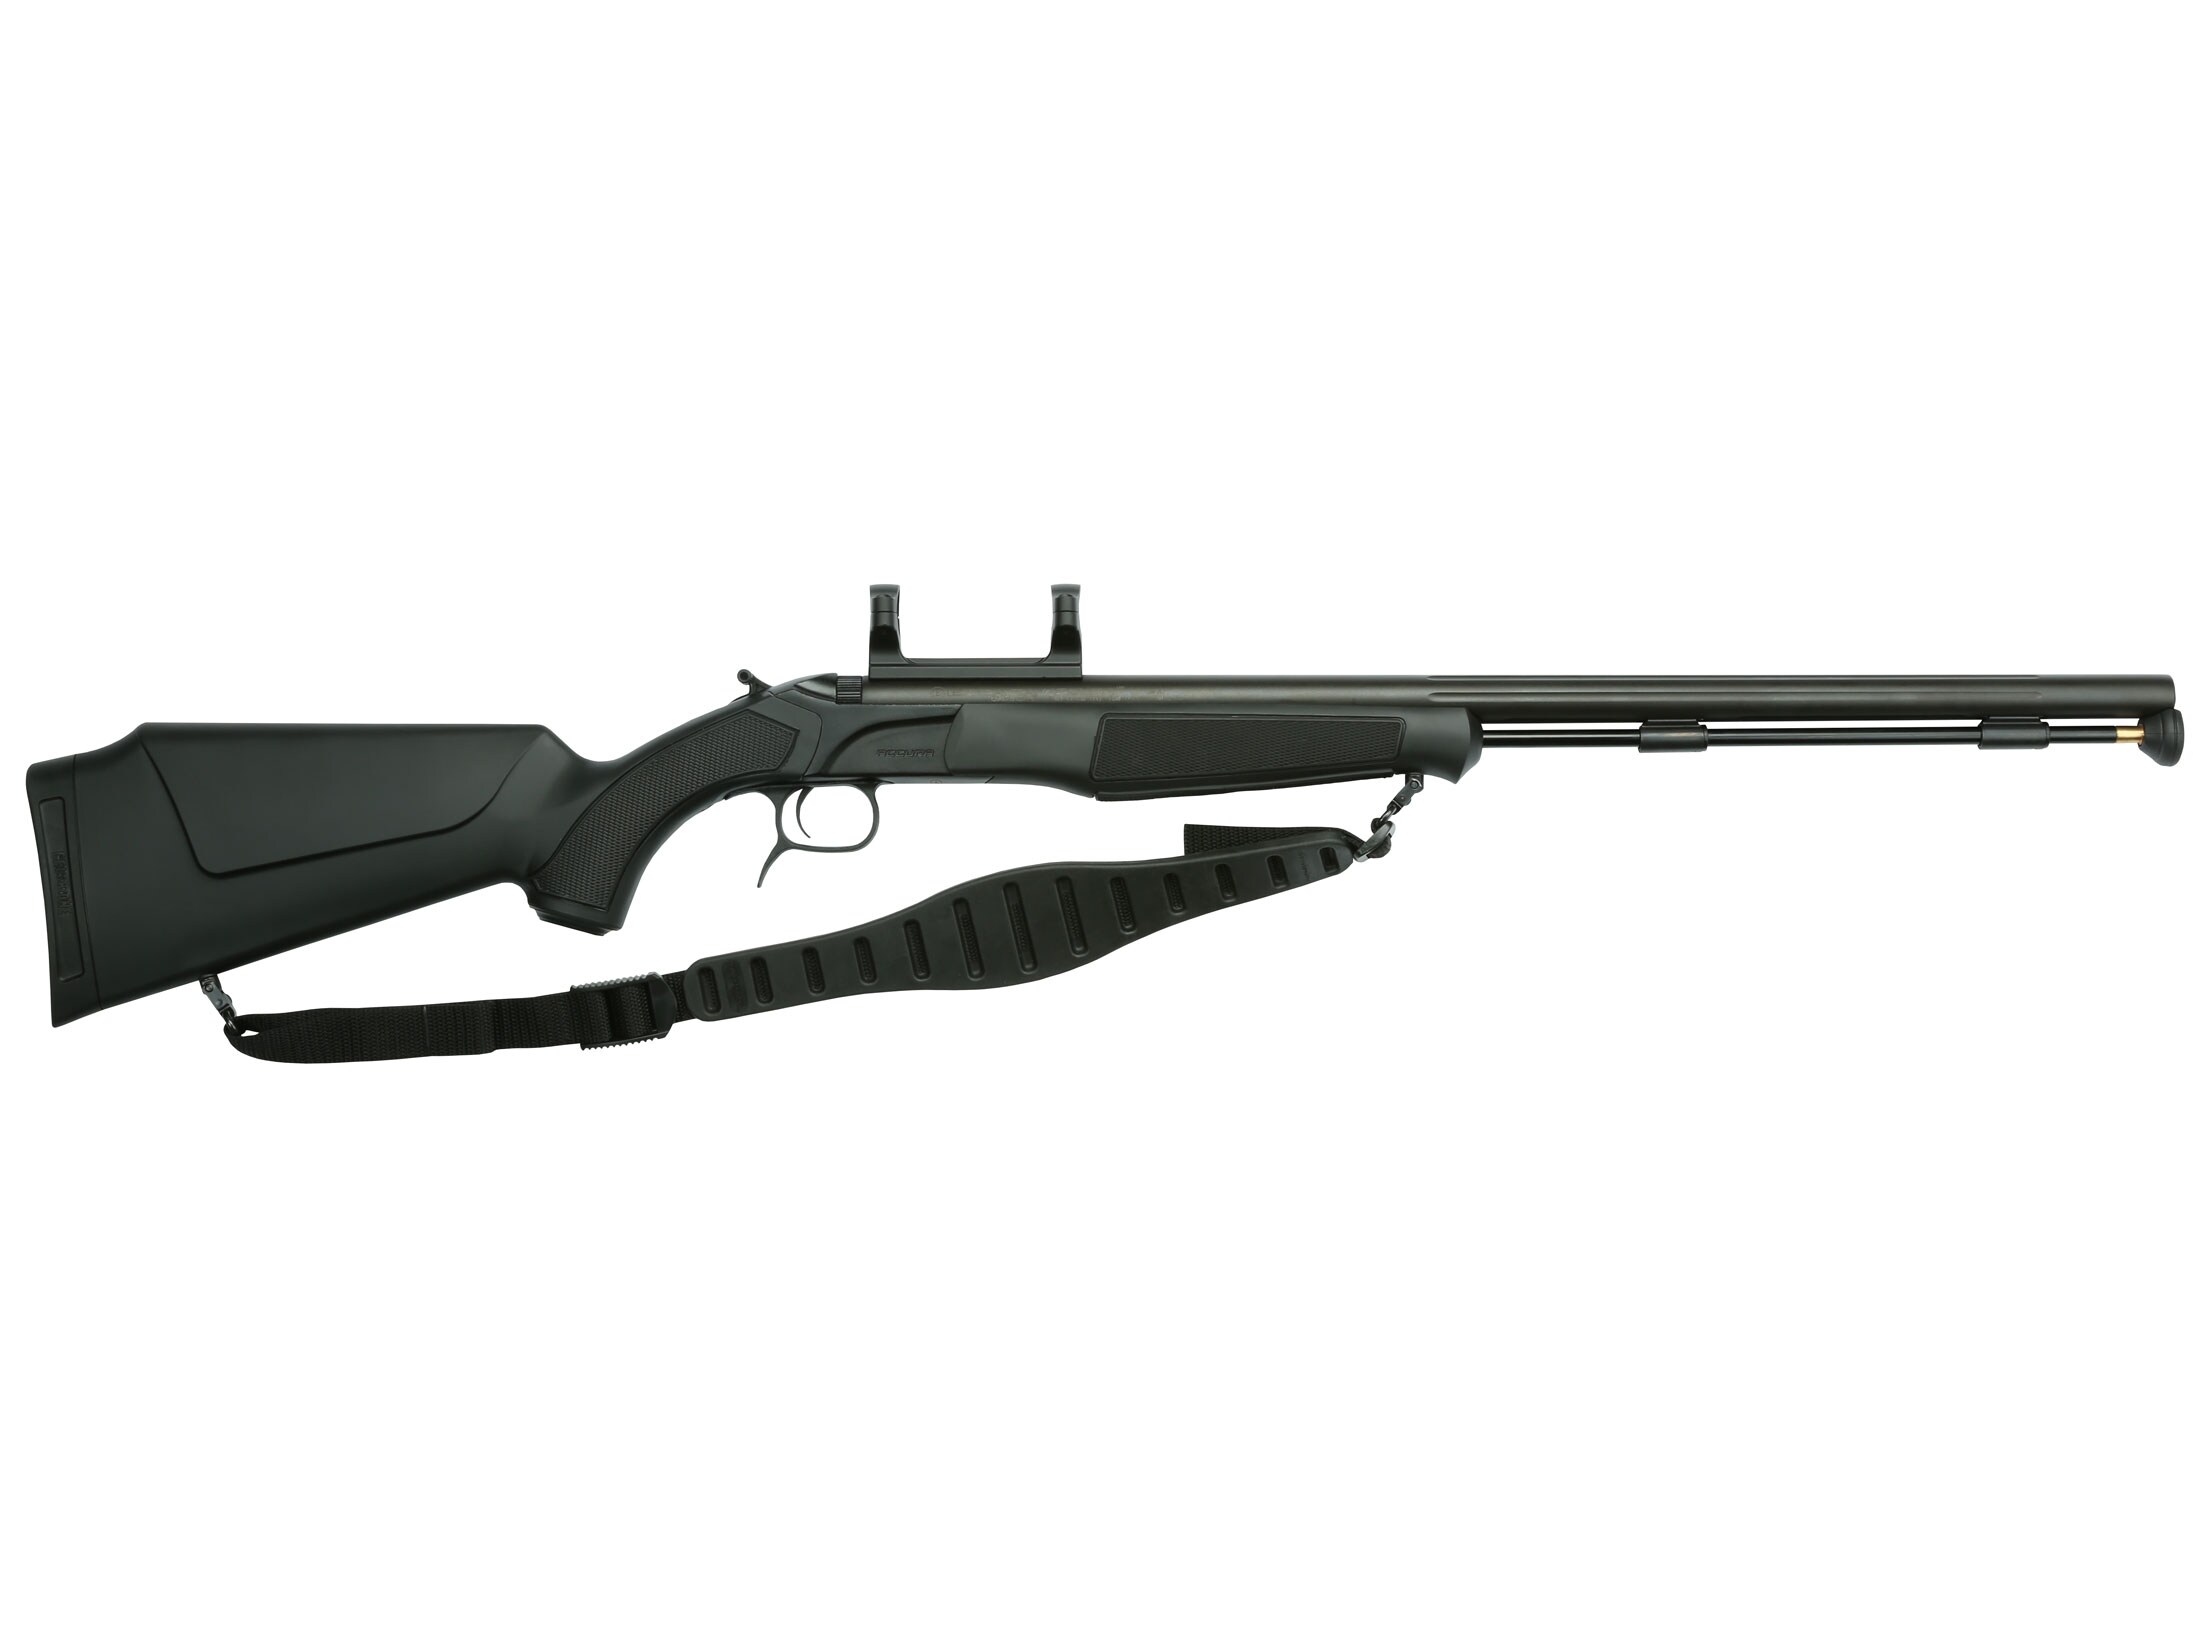 Image of CVA Accura MR Muzzleloading Rifle with Dead-On Scope Mount 50 Caliber 25" Fluted Stainless Steel Barrel Synthetic Stock